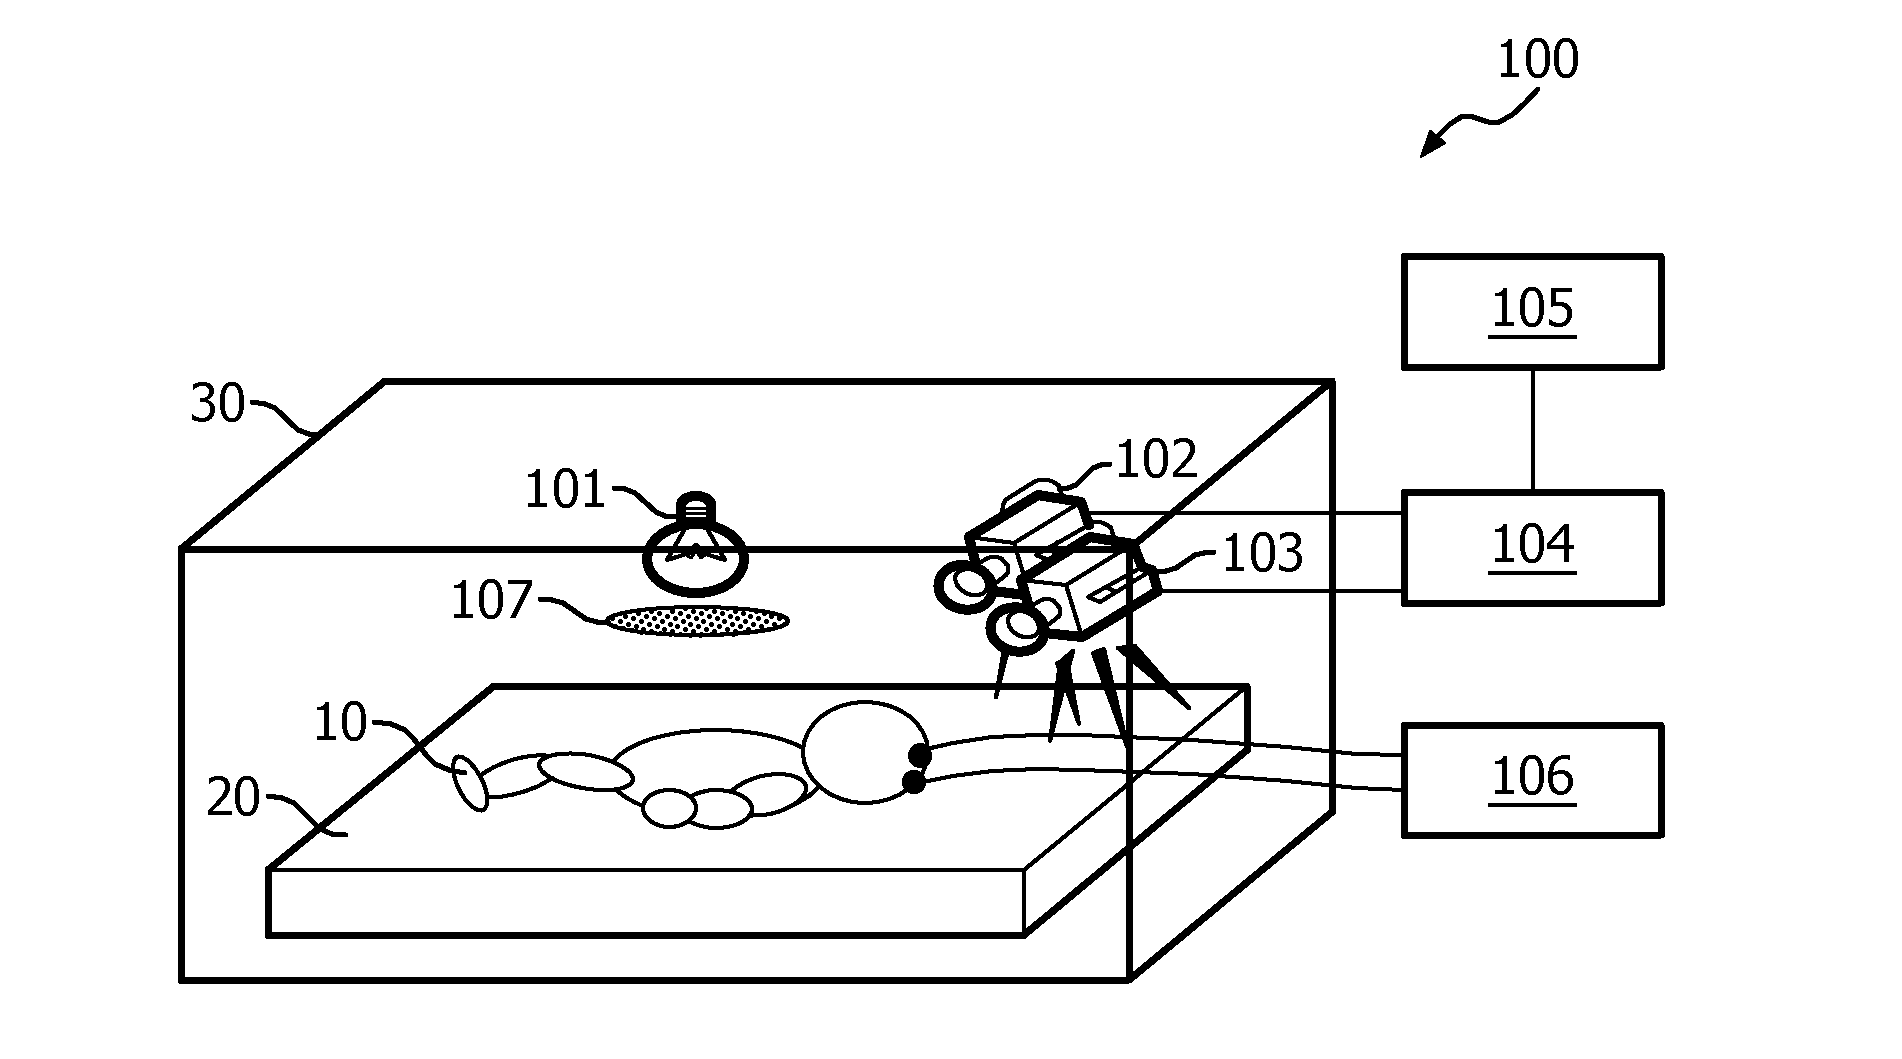 Method and system for monitoring the skin color of a user